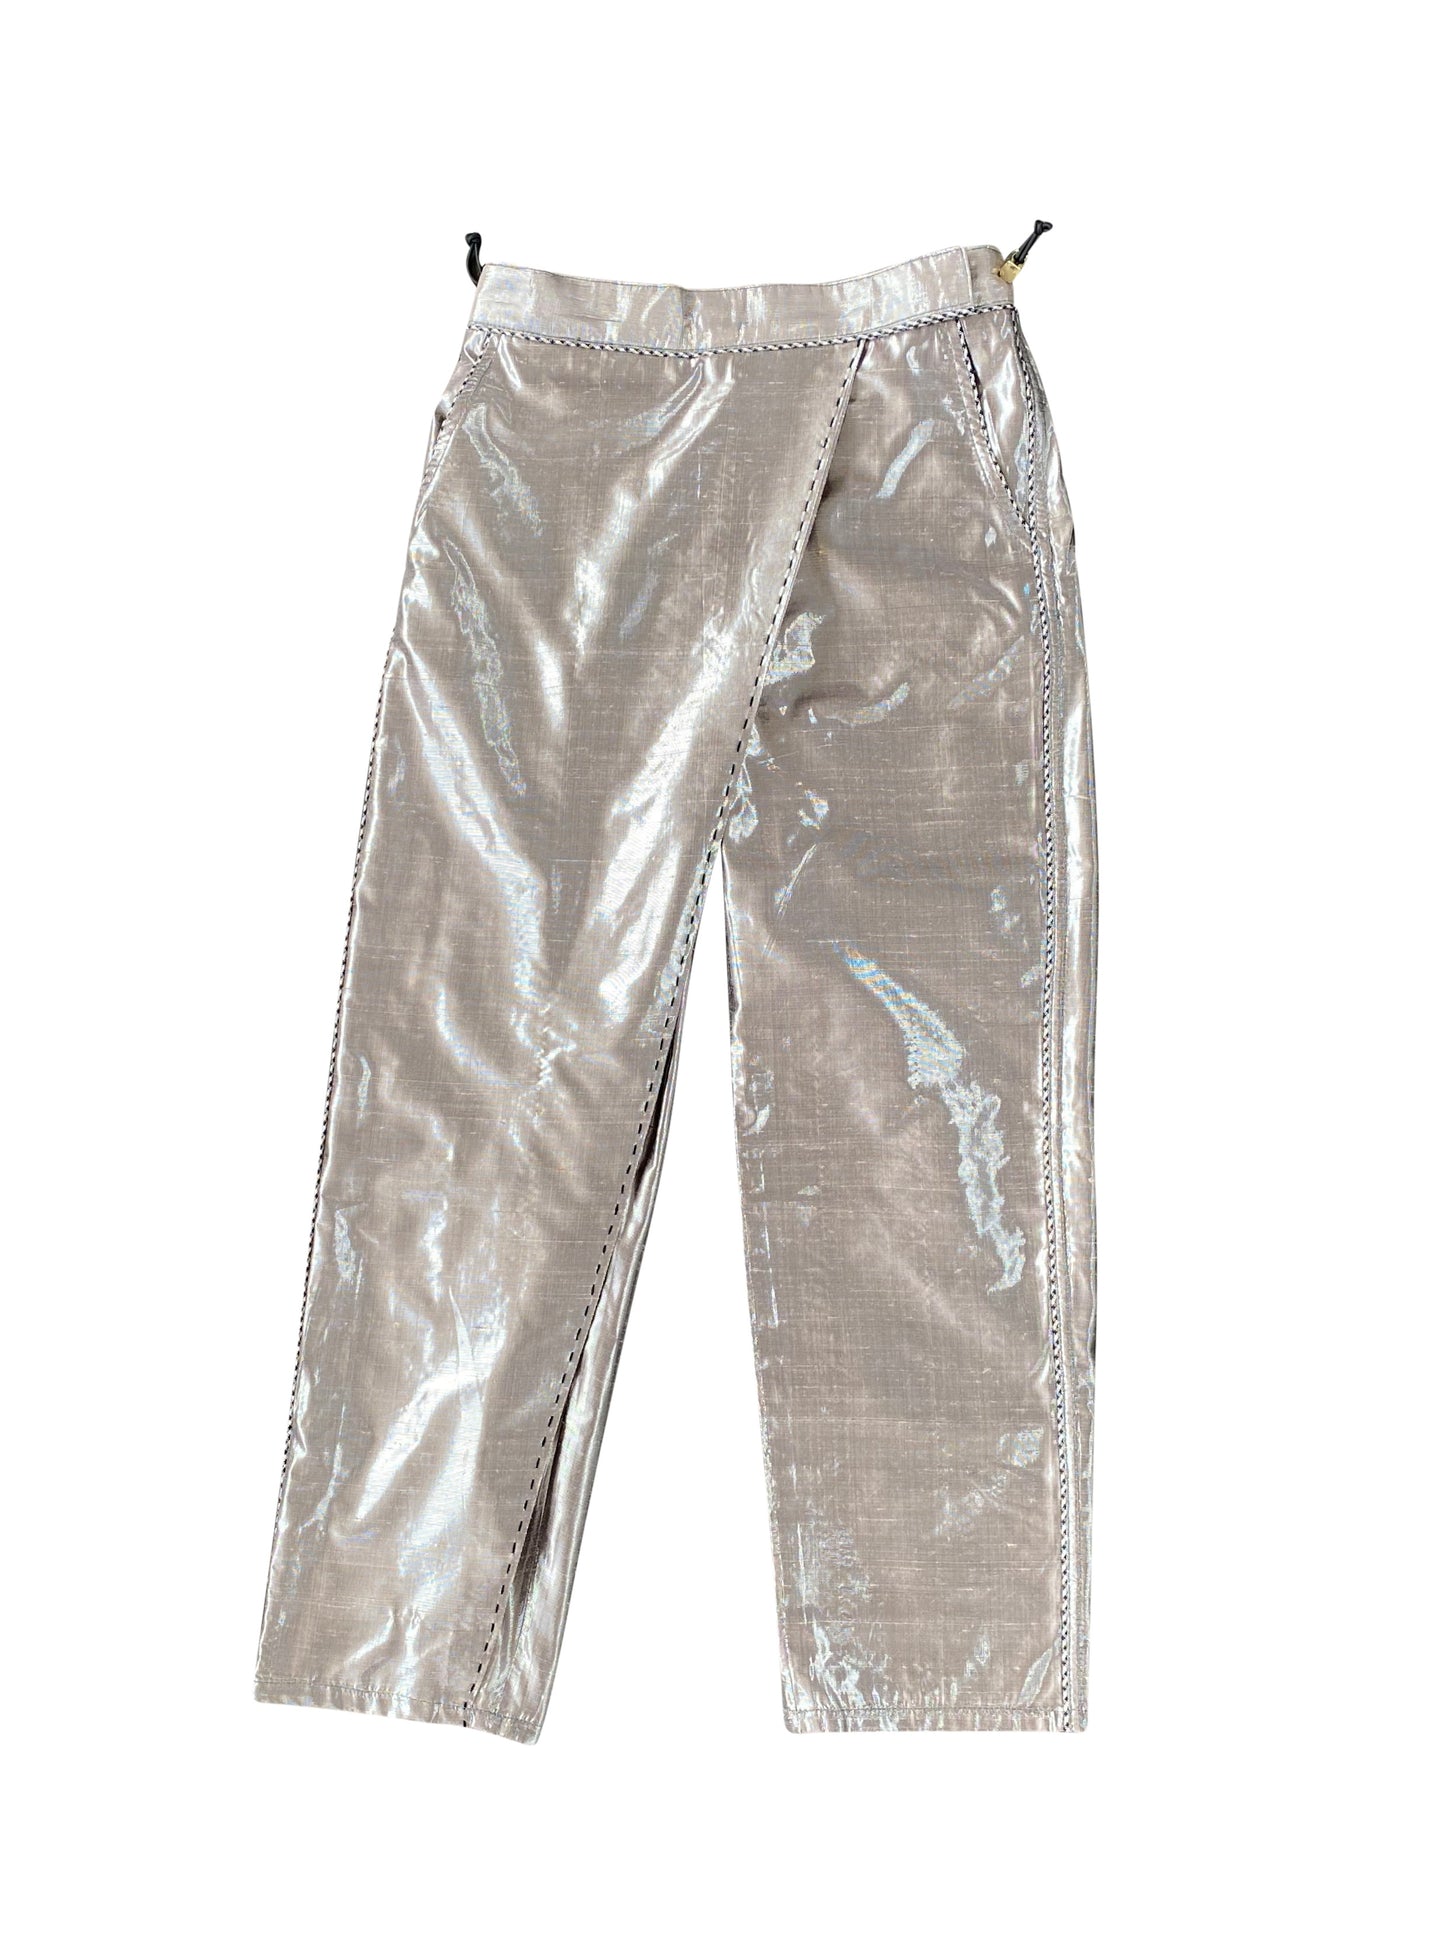 Silk Lamé Hand Embroidered Wrap Pants